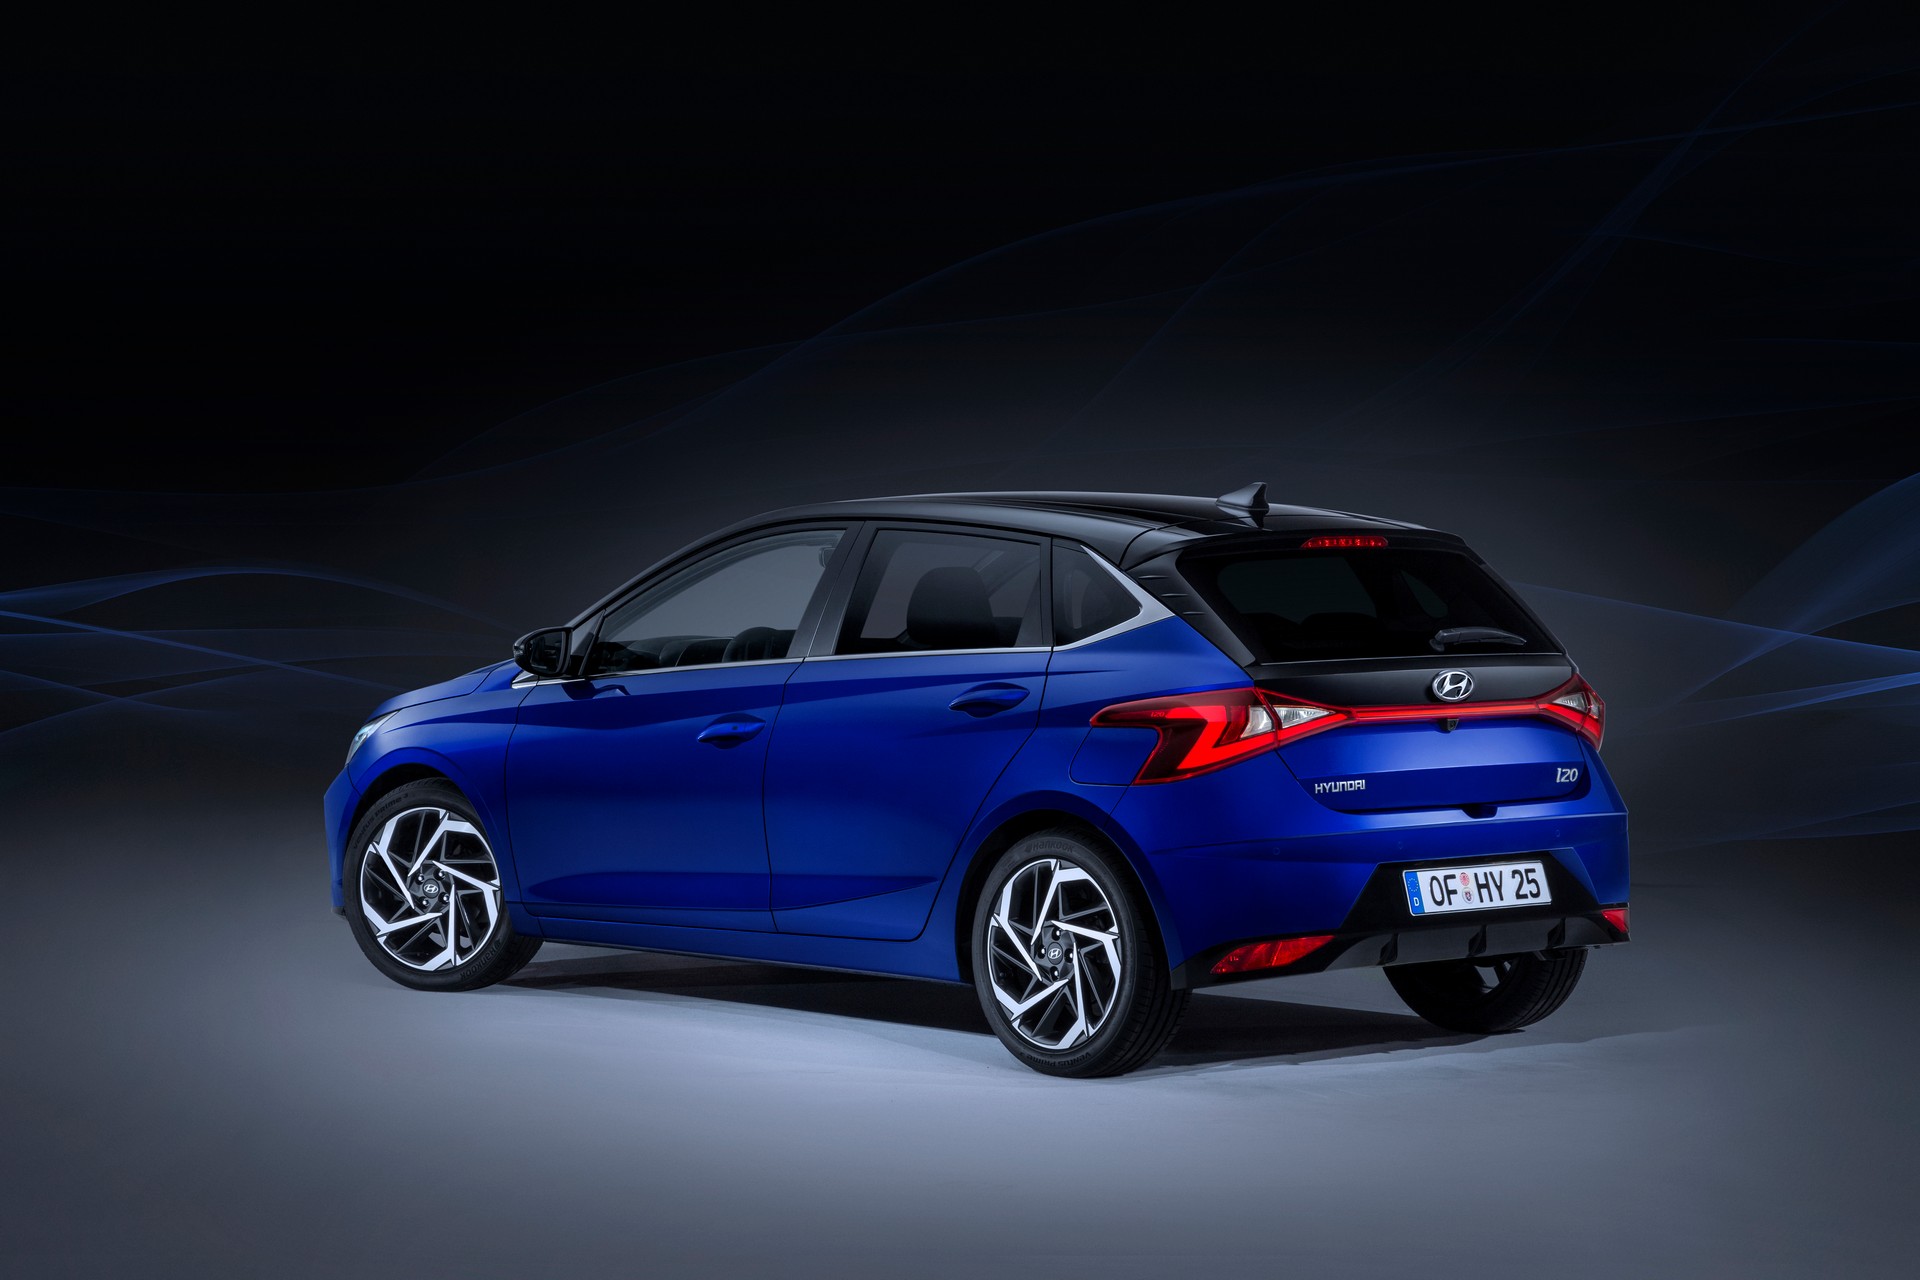 2020 Hyundai i20 Goes Official, Features Mild Hybrid Powertrain | Carscoops